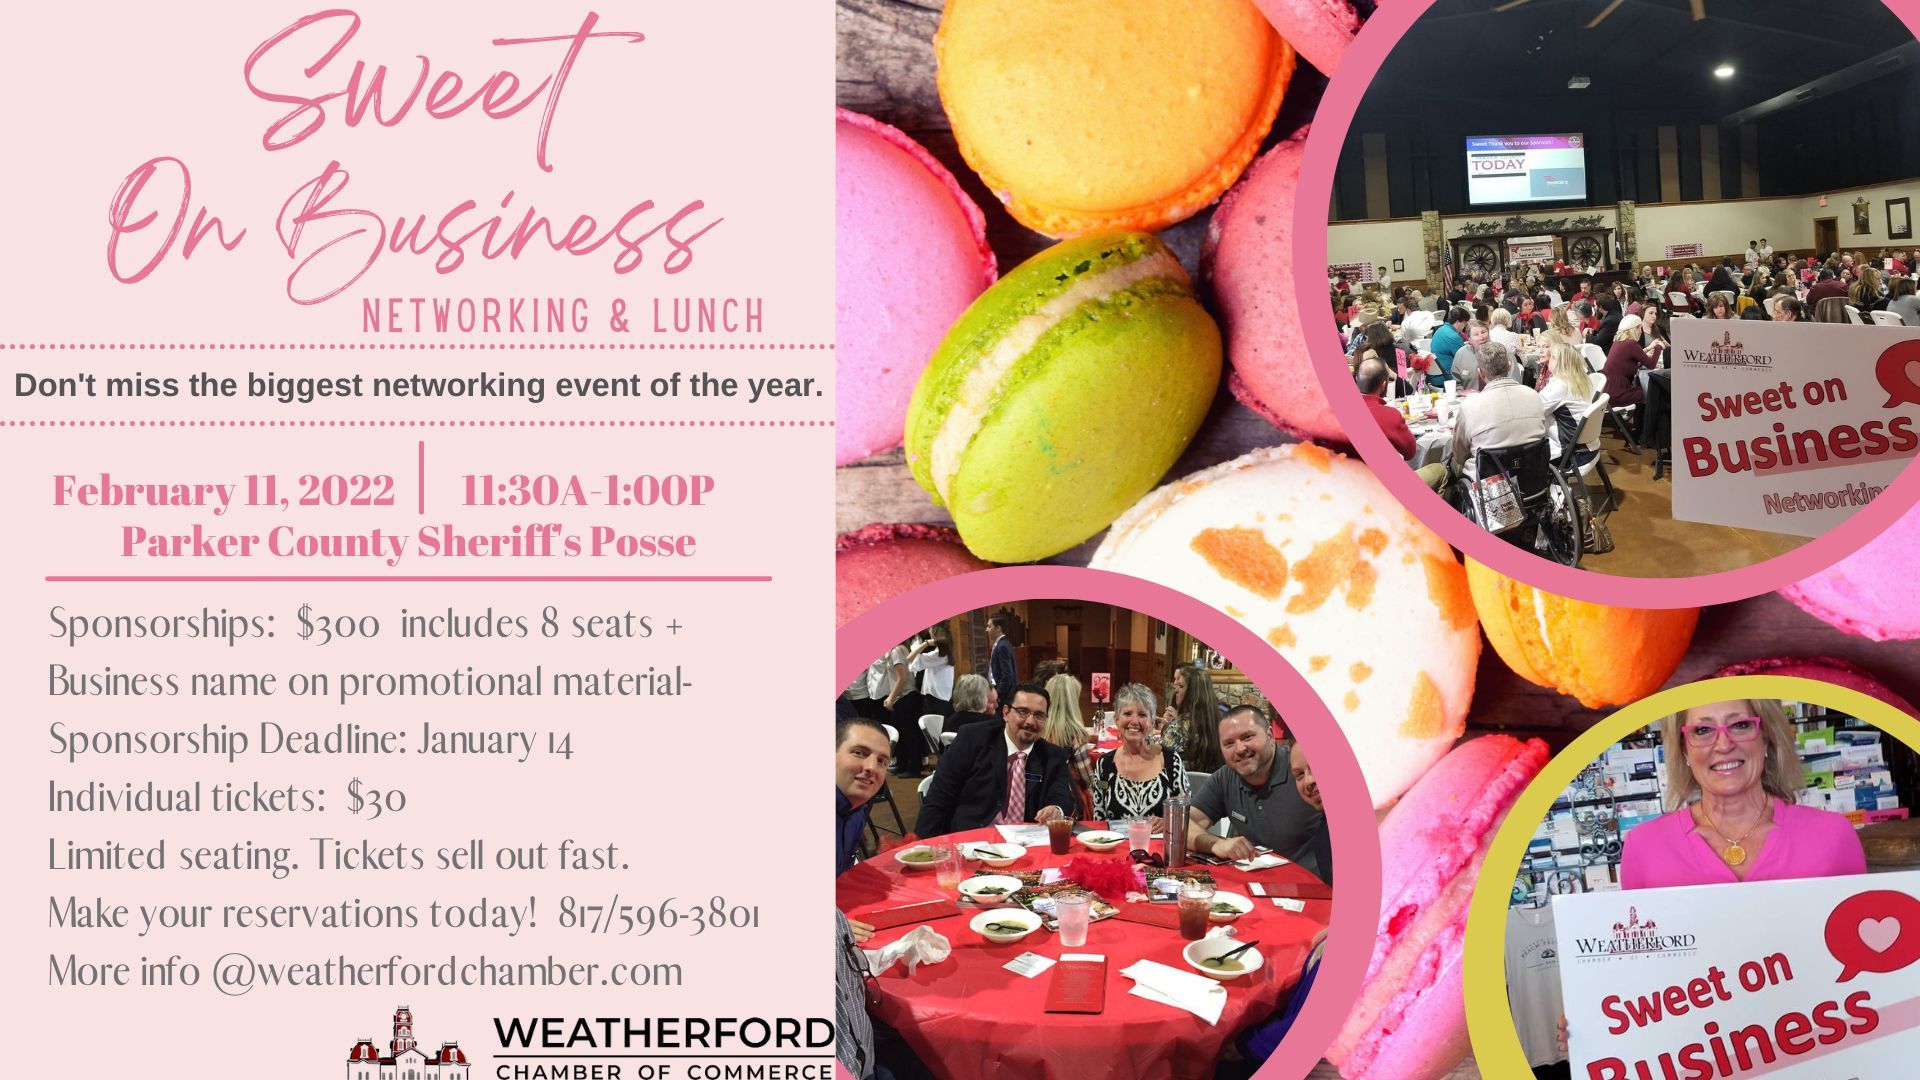 Sweet on Business 2021 invite